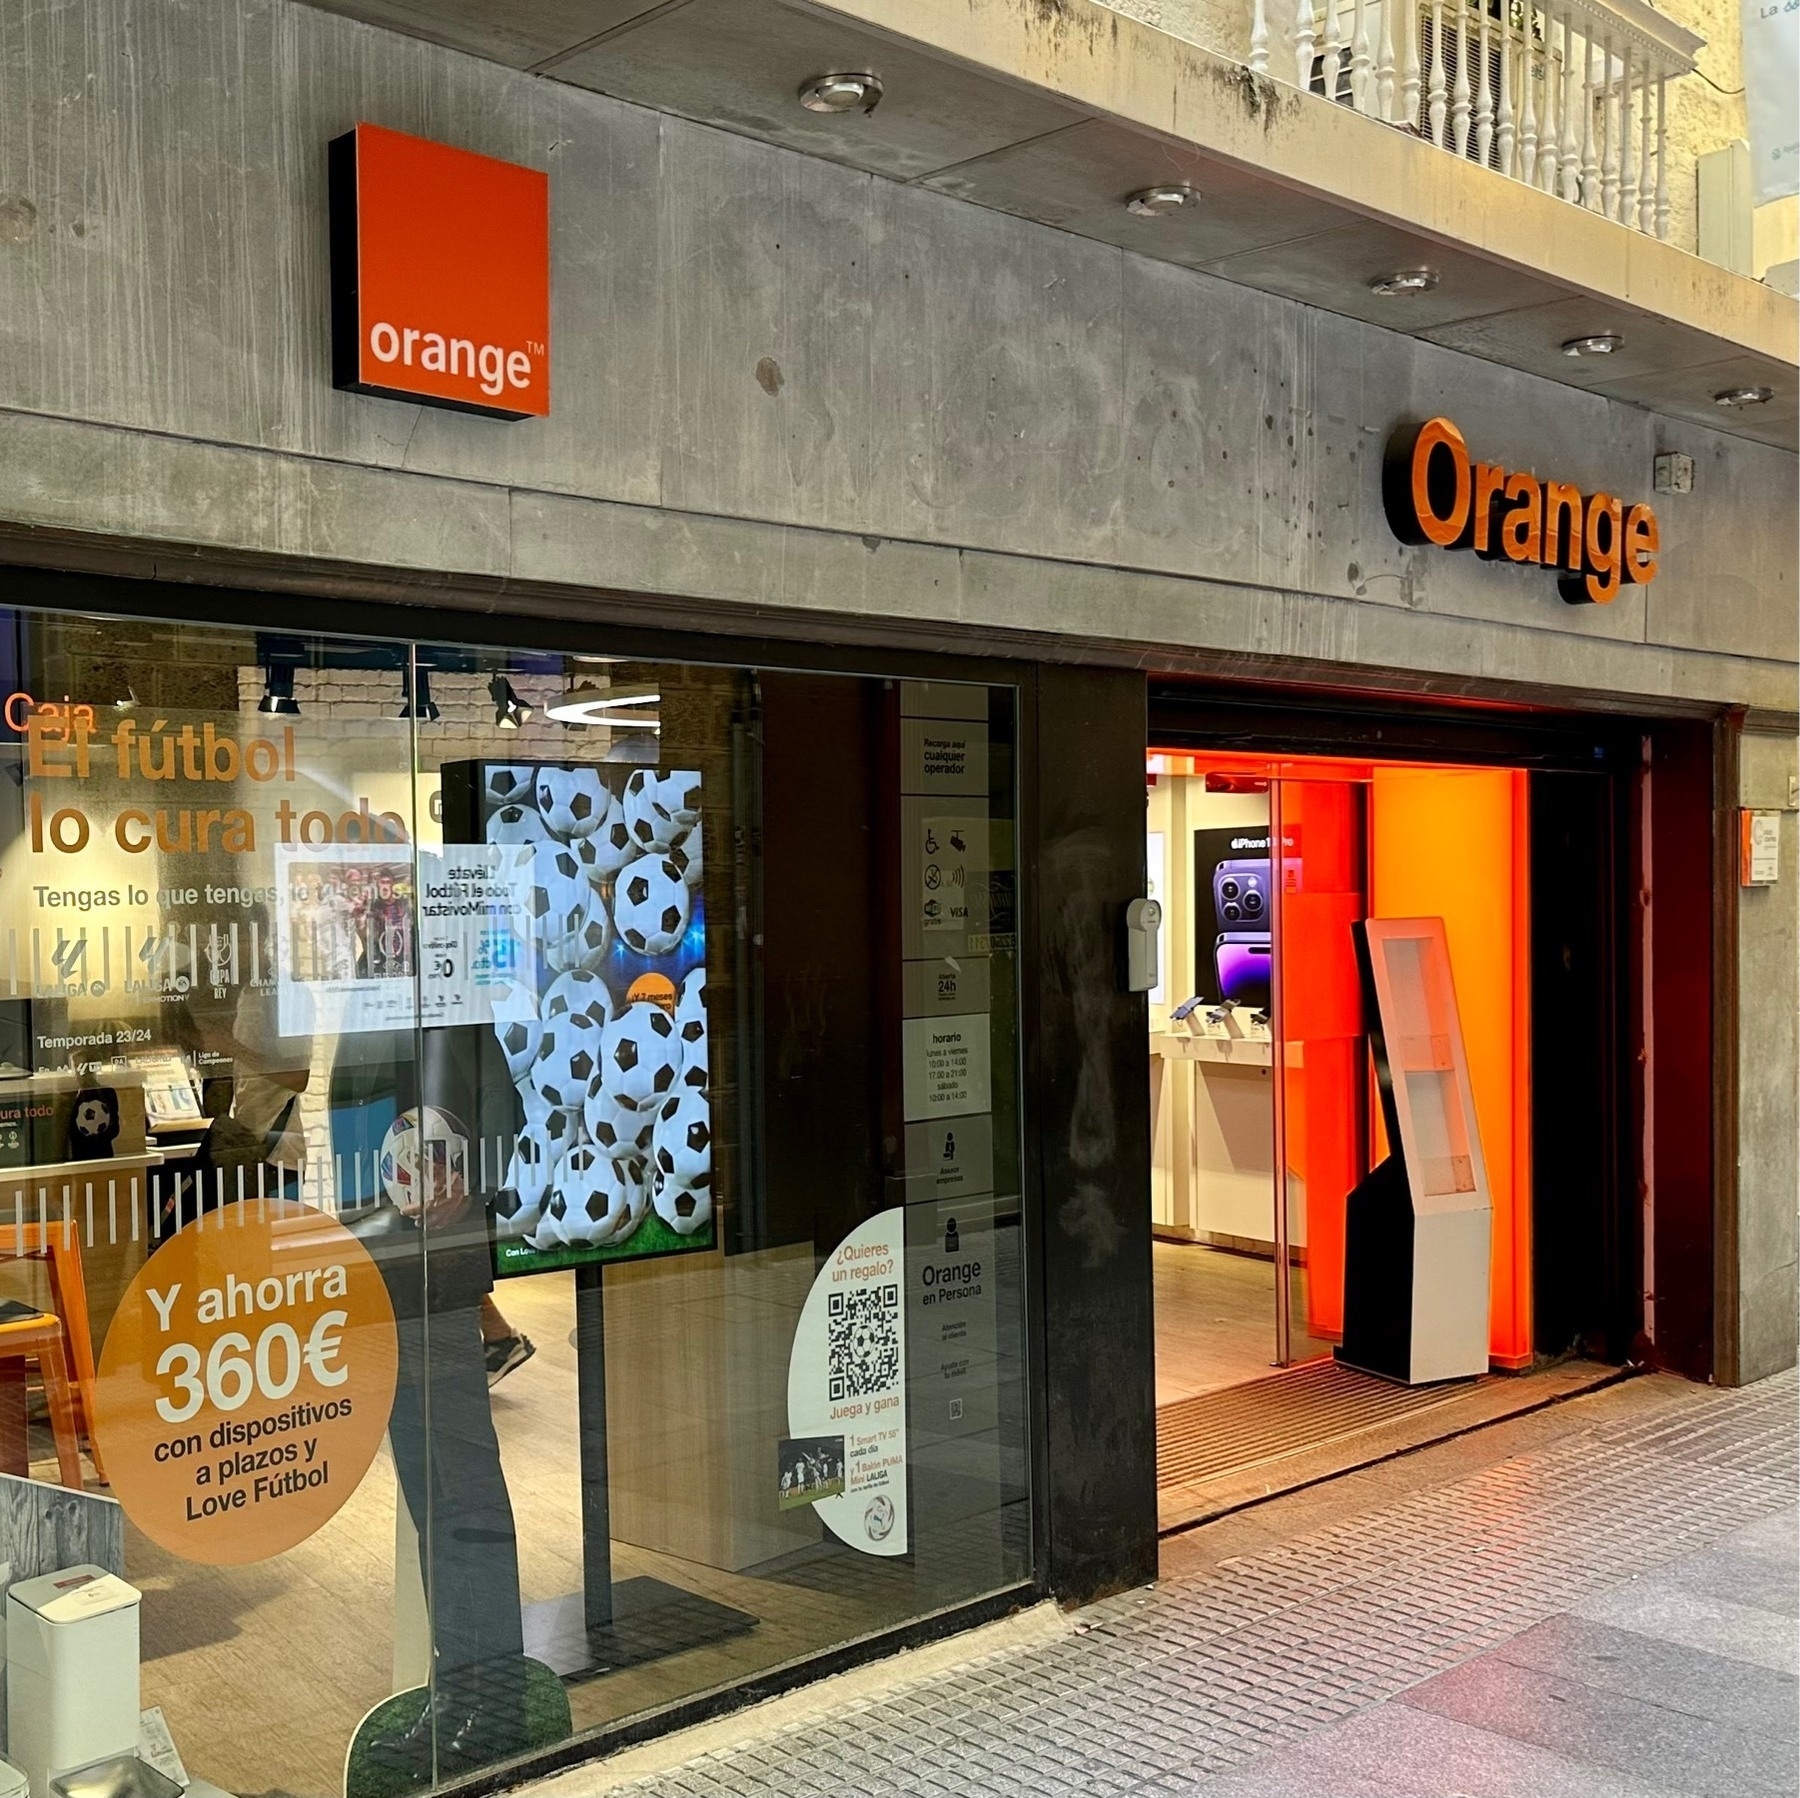 Grey frontage for the Orange (i.e. France Telecom) shop, with the square Orange logo and Spanish-language offers on the window